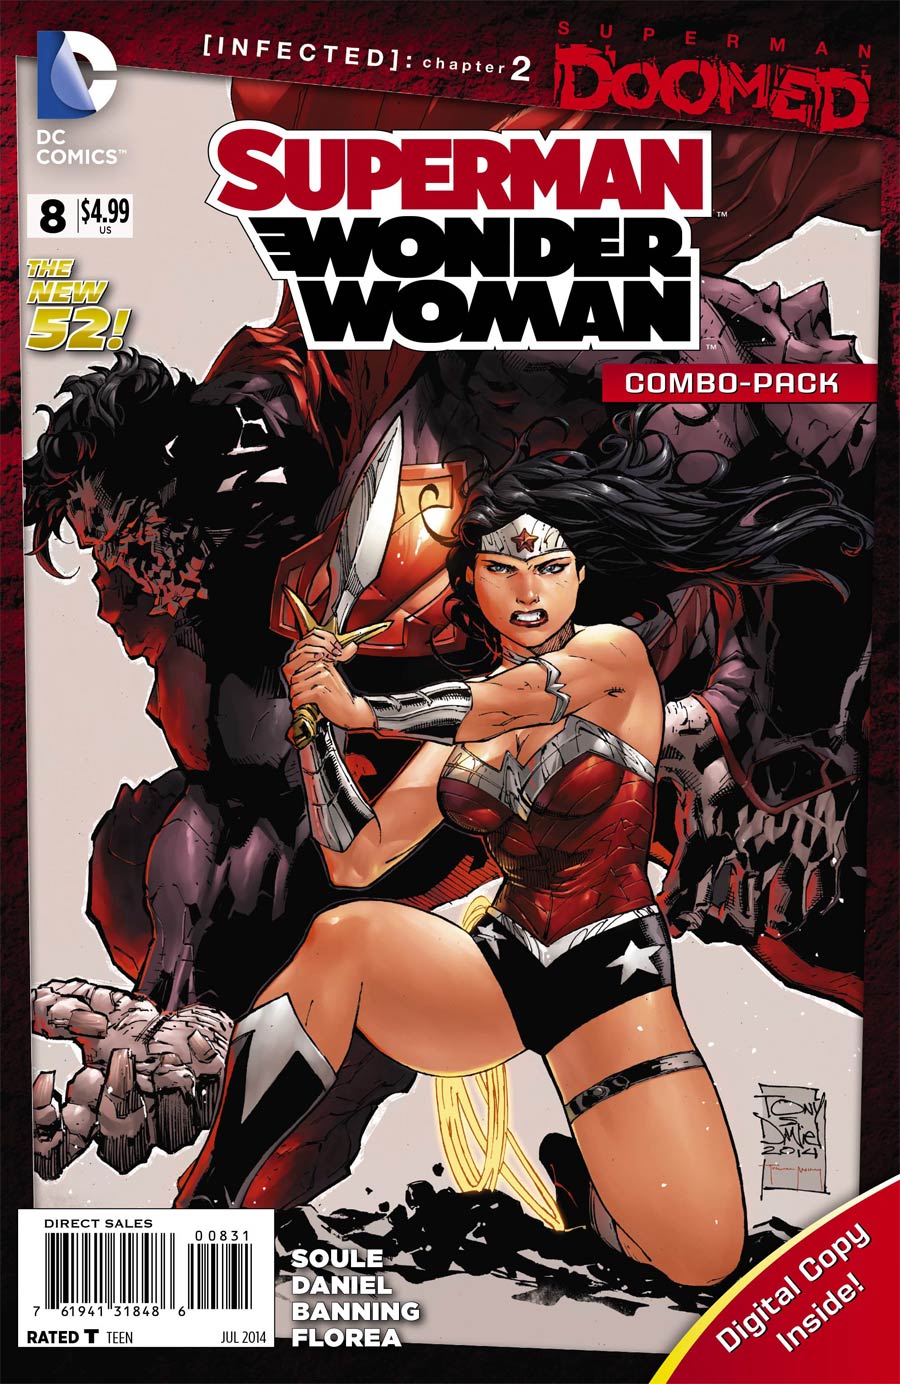 Superman Wonder Woman #8 Cover B Combo Pack With Polybag (Superman Doomed Tie-In)